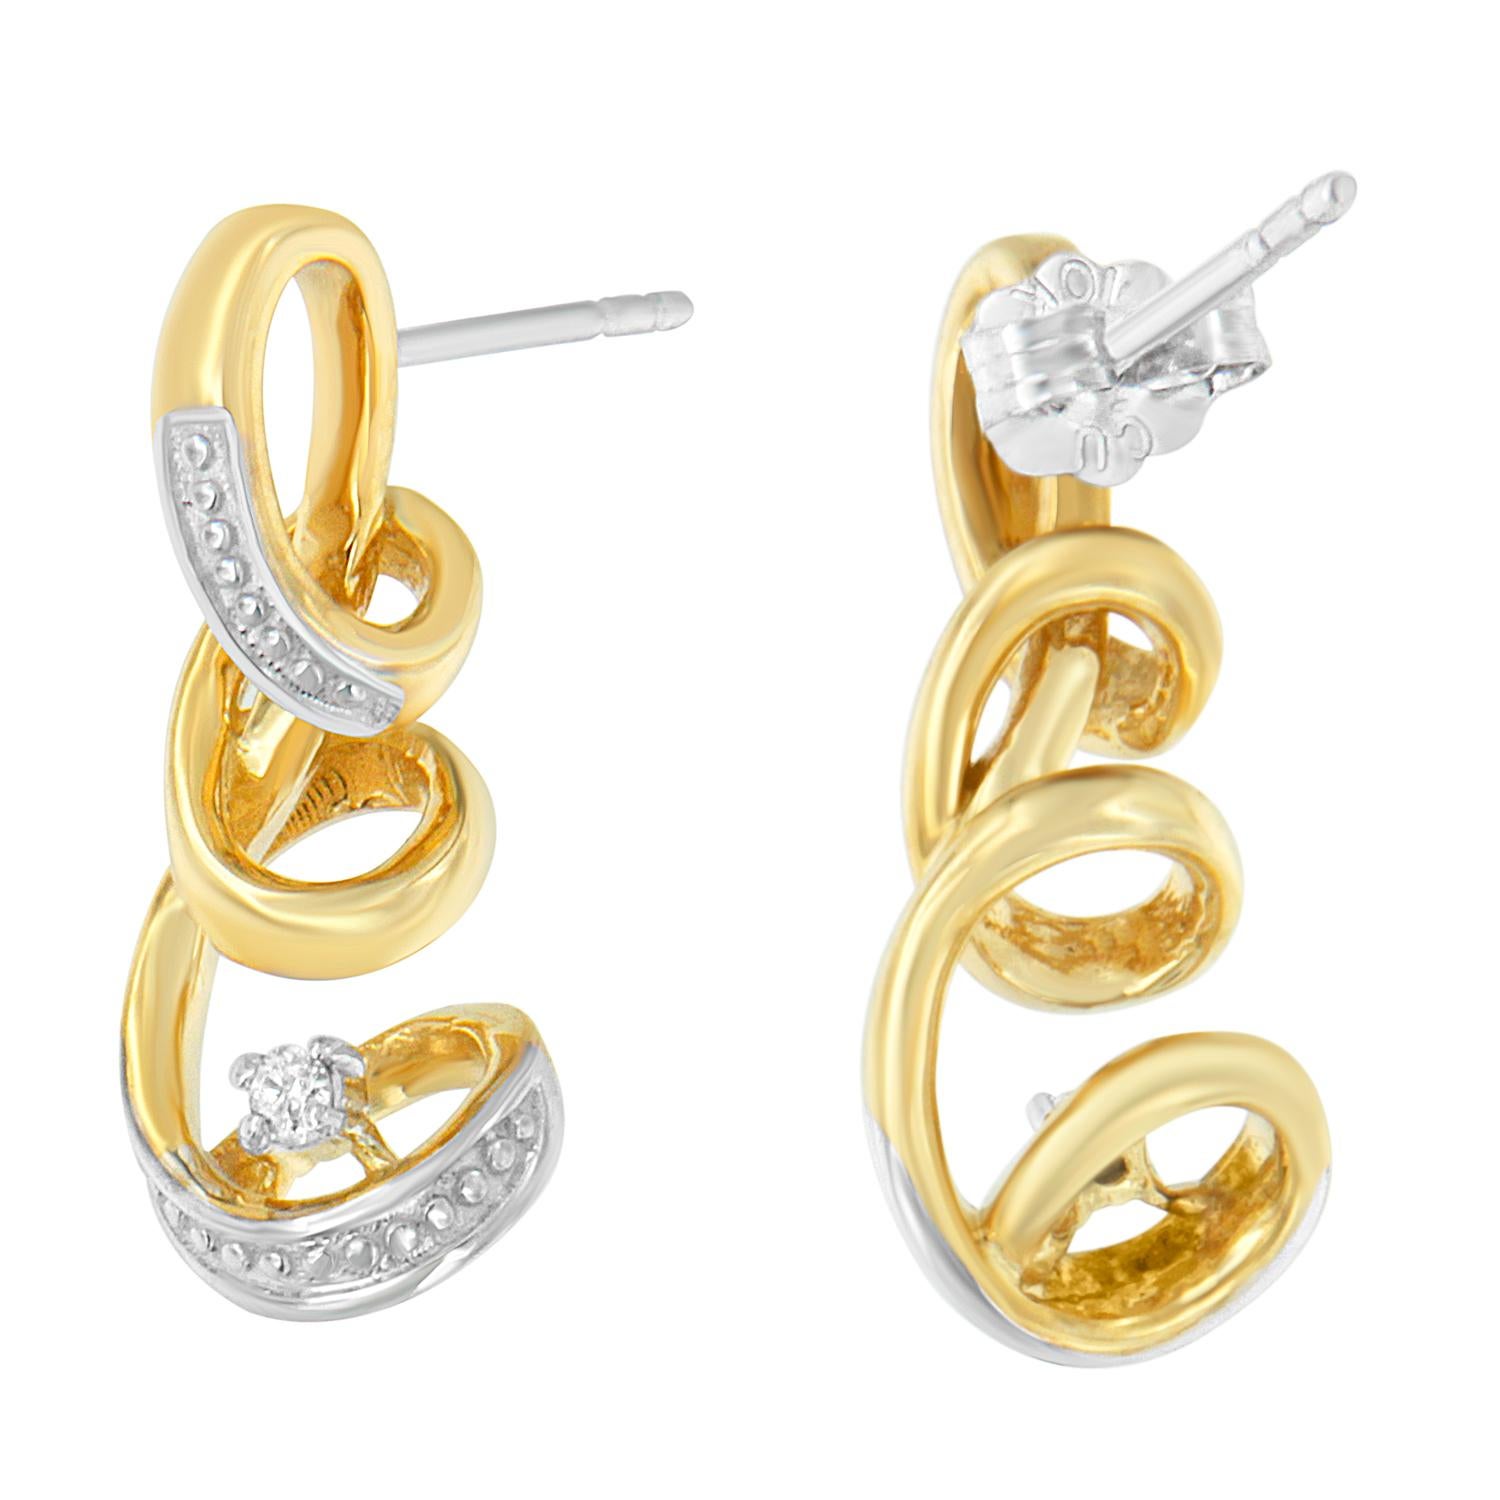 Simple yet stunning, these earrings are decorated with eye grabbing Round cut diamonds for an impressive weight of 0.05 carat masterfully set in finely polished 10K Two Tone gold. These natural diamonds are color rated as J-K Color, and clarity